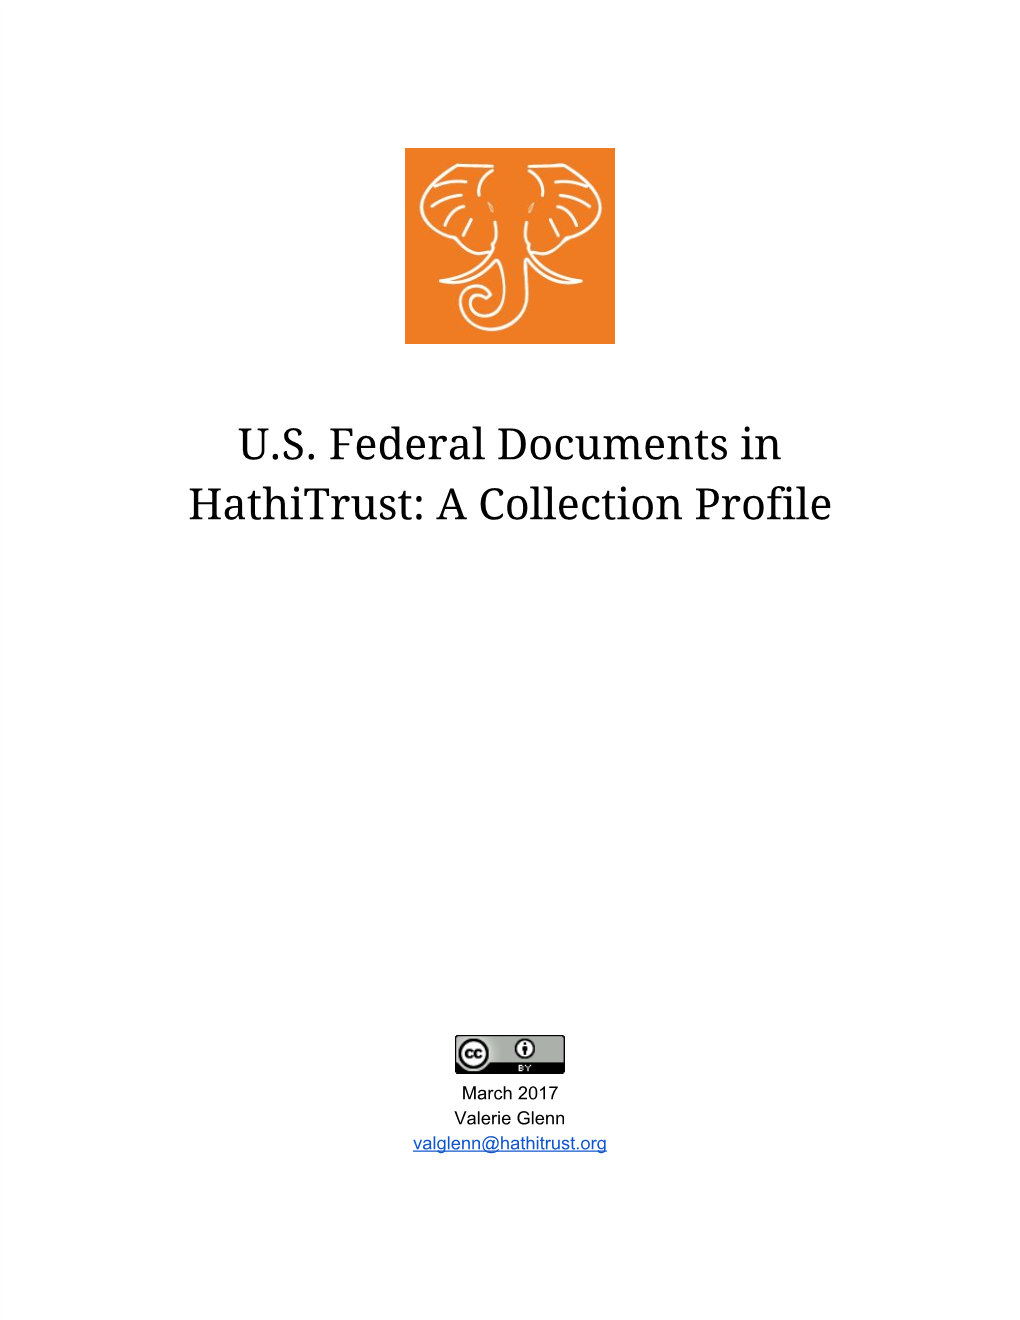 U.S. Federal Documents in Hathitrust: a Collection Profile